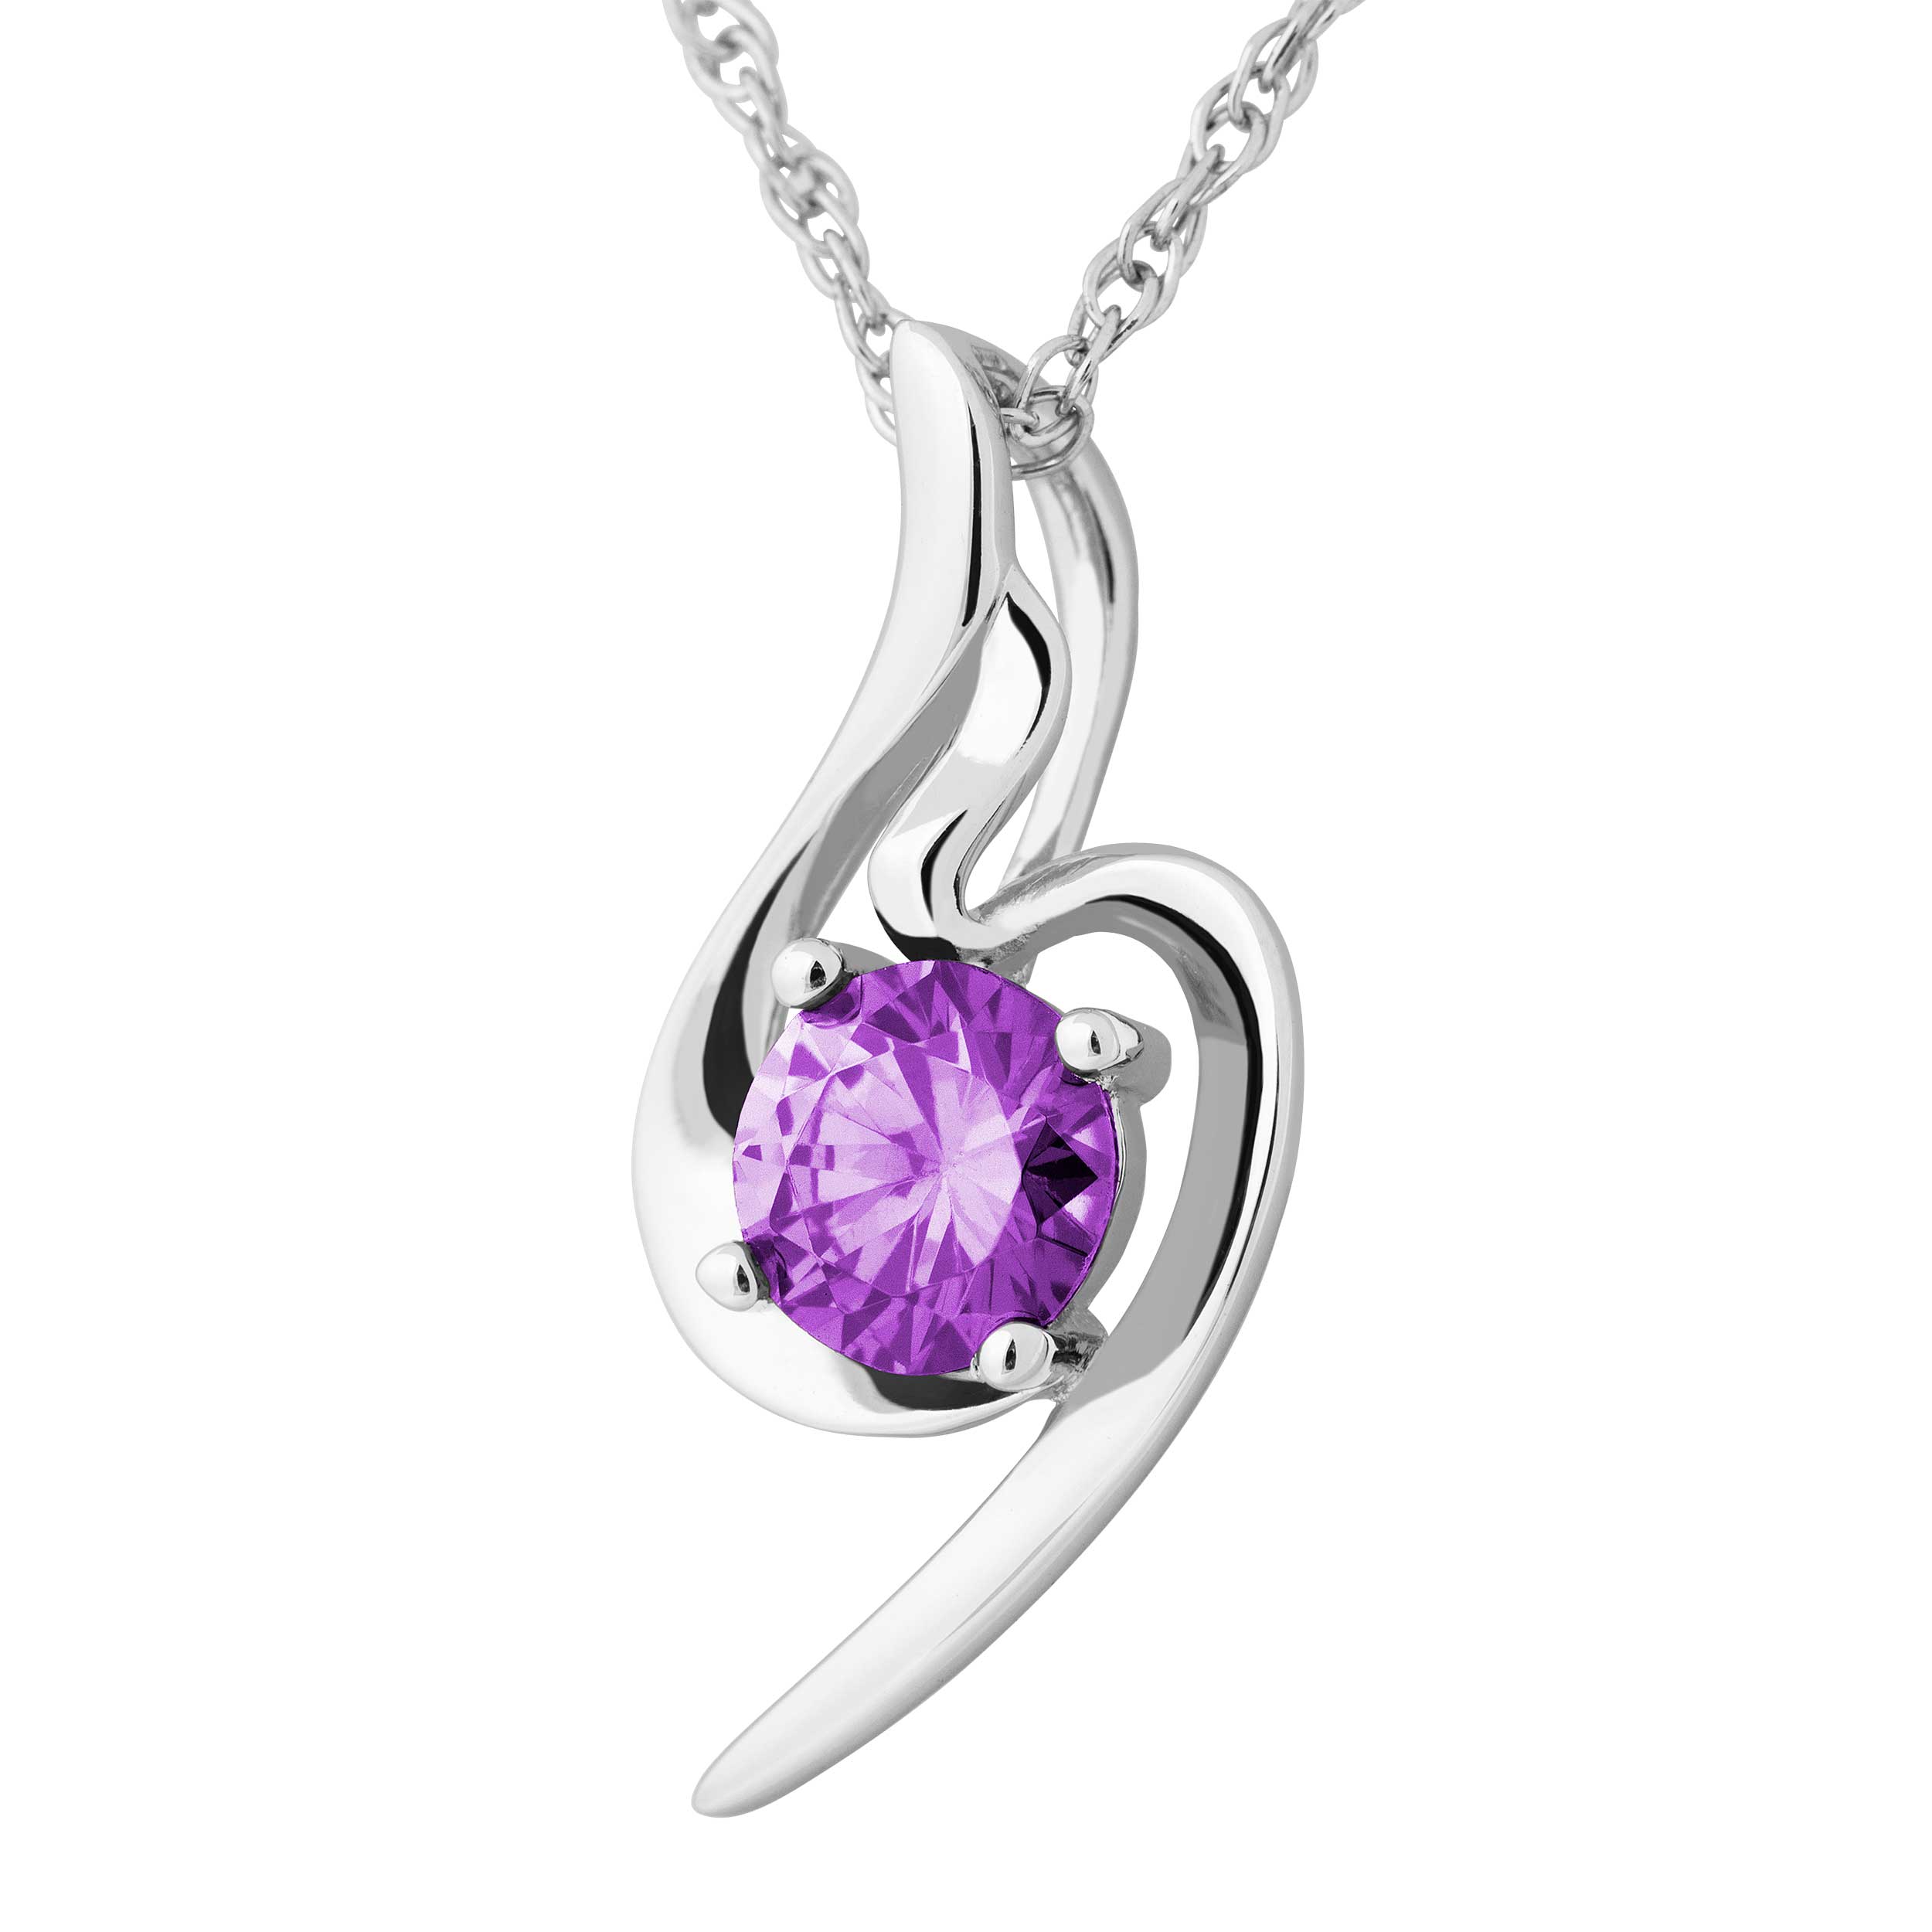 Freeform Pendant Necklace, Rhodium Plated Sterling Silver